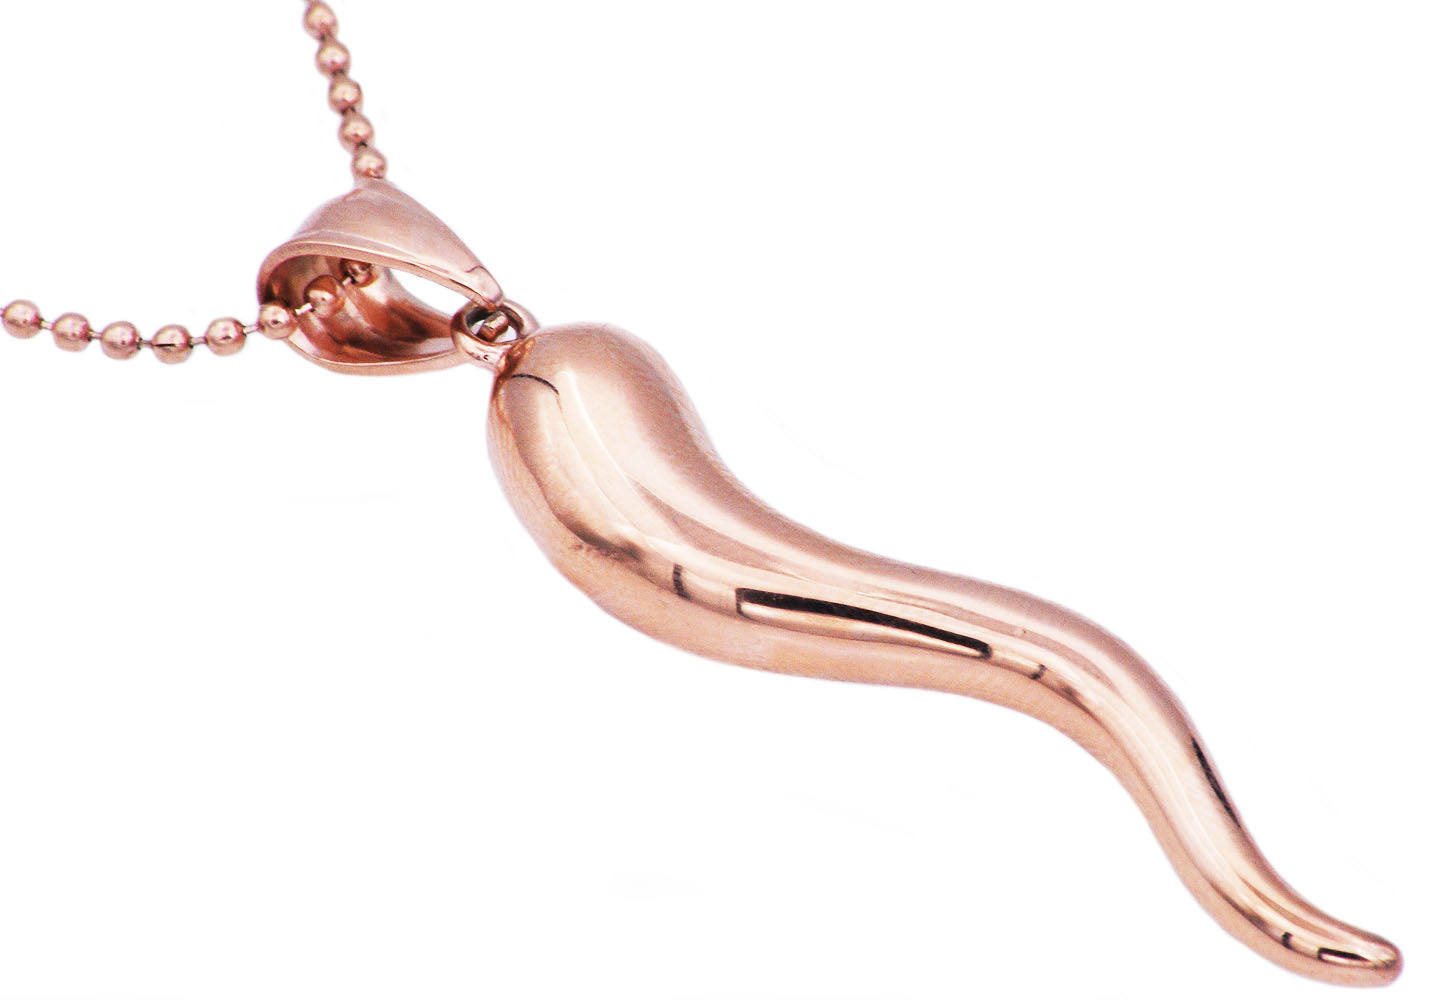 Italian Horn Gold Snake Necklace Amulet Gold Stainless Steel Pendant & Chain  For Men/Women Fashion Jewelry Gift U7 From Shanye08, $10.65 | DHgate.Com